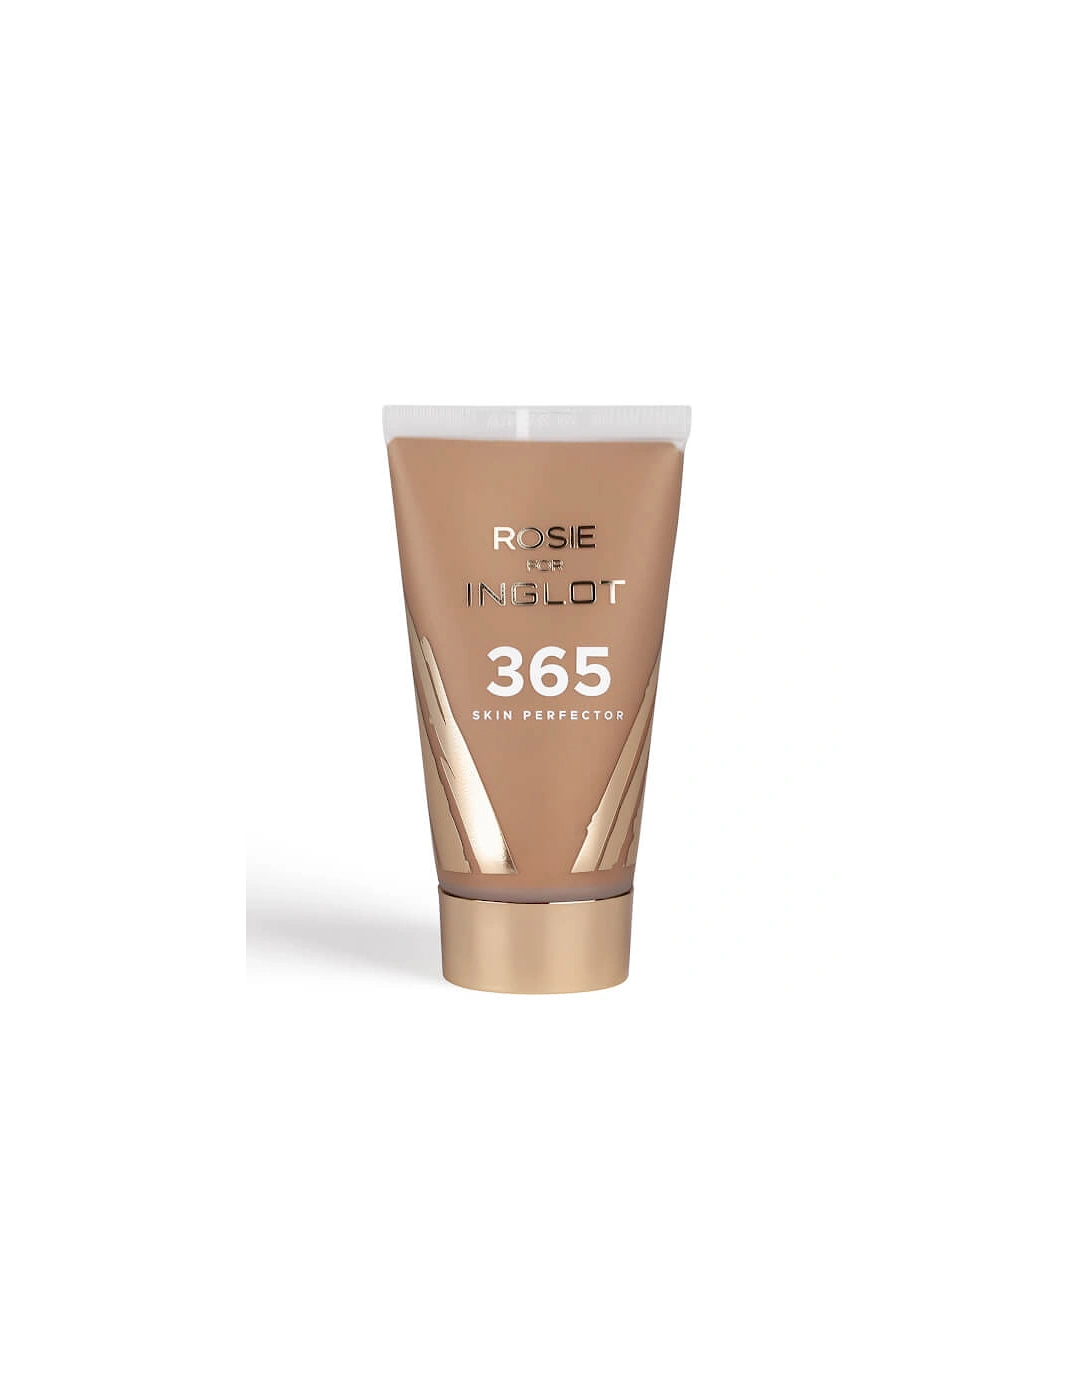 Rosie for 365 Skin Perfector - Chocolate Bronze, 2 of 1